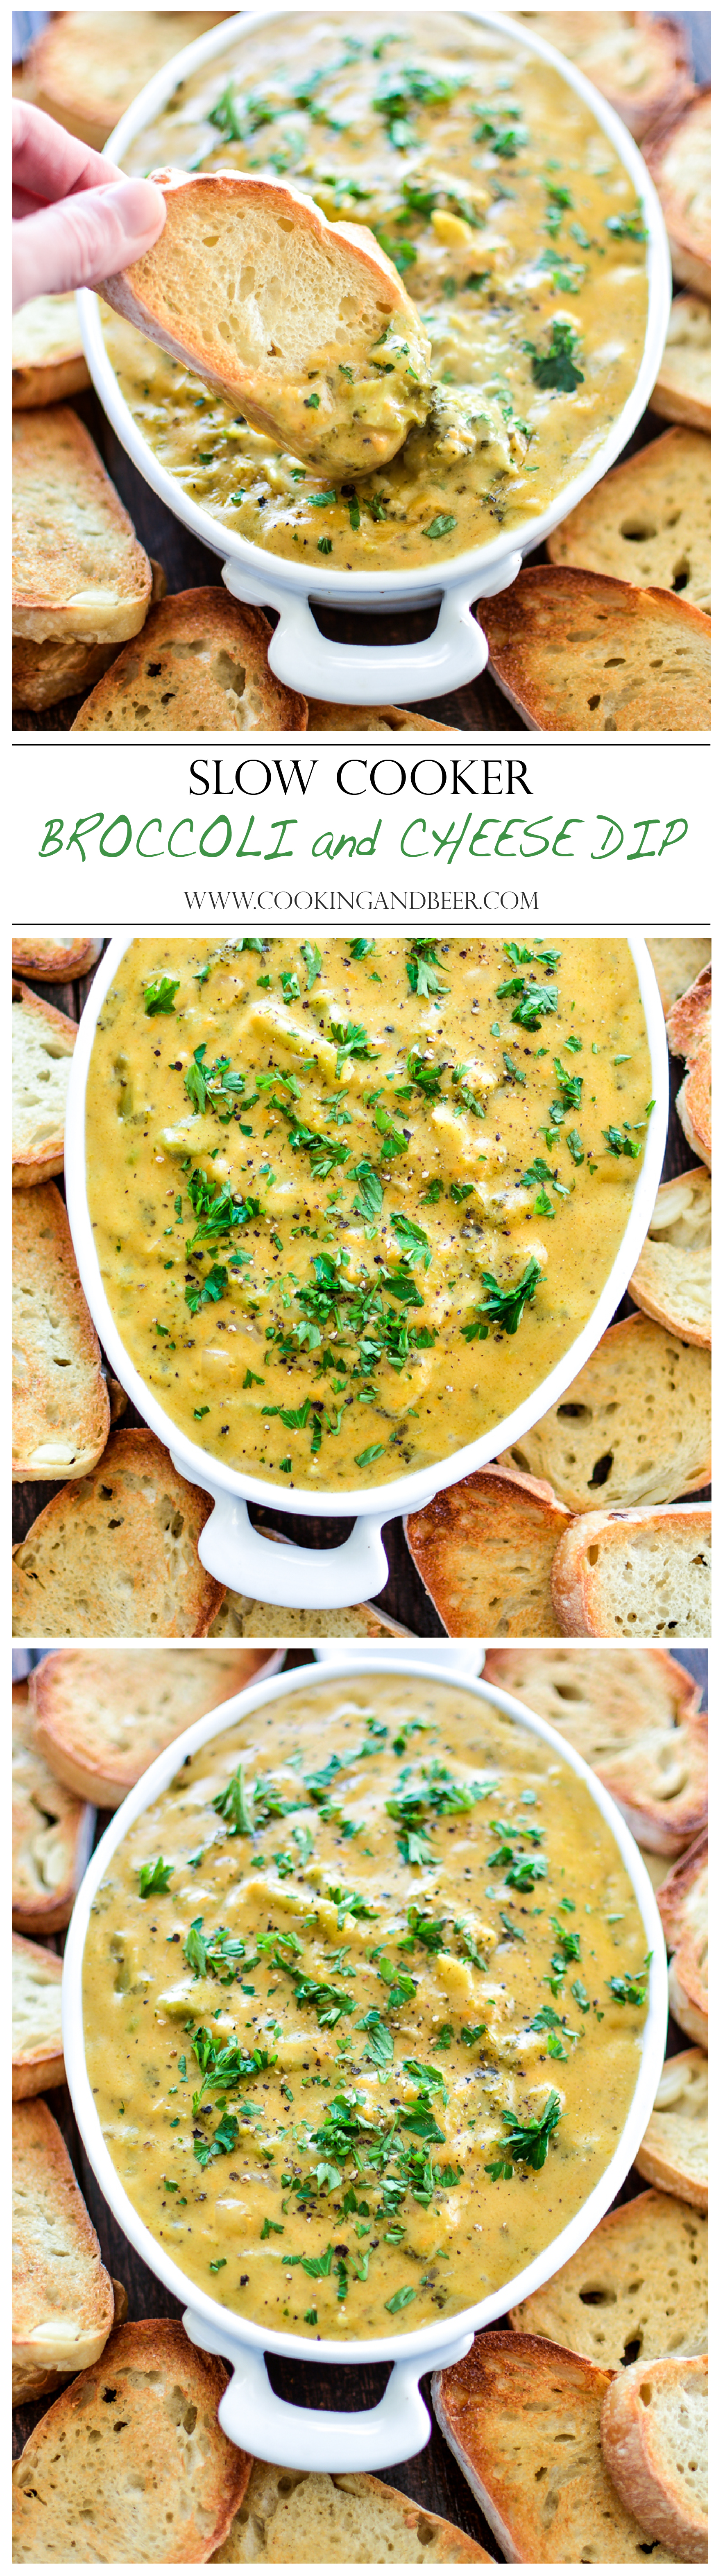 Slow Cooker Broccoli and Cheese Dip | www.cookingandbeer.com | #gamedayfood #appetizer #footballfood